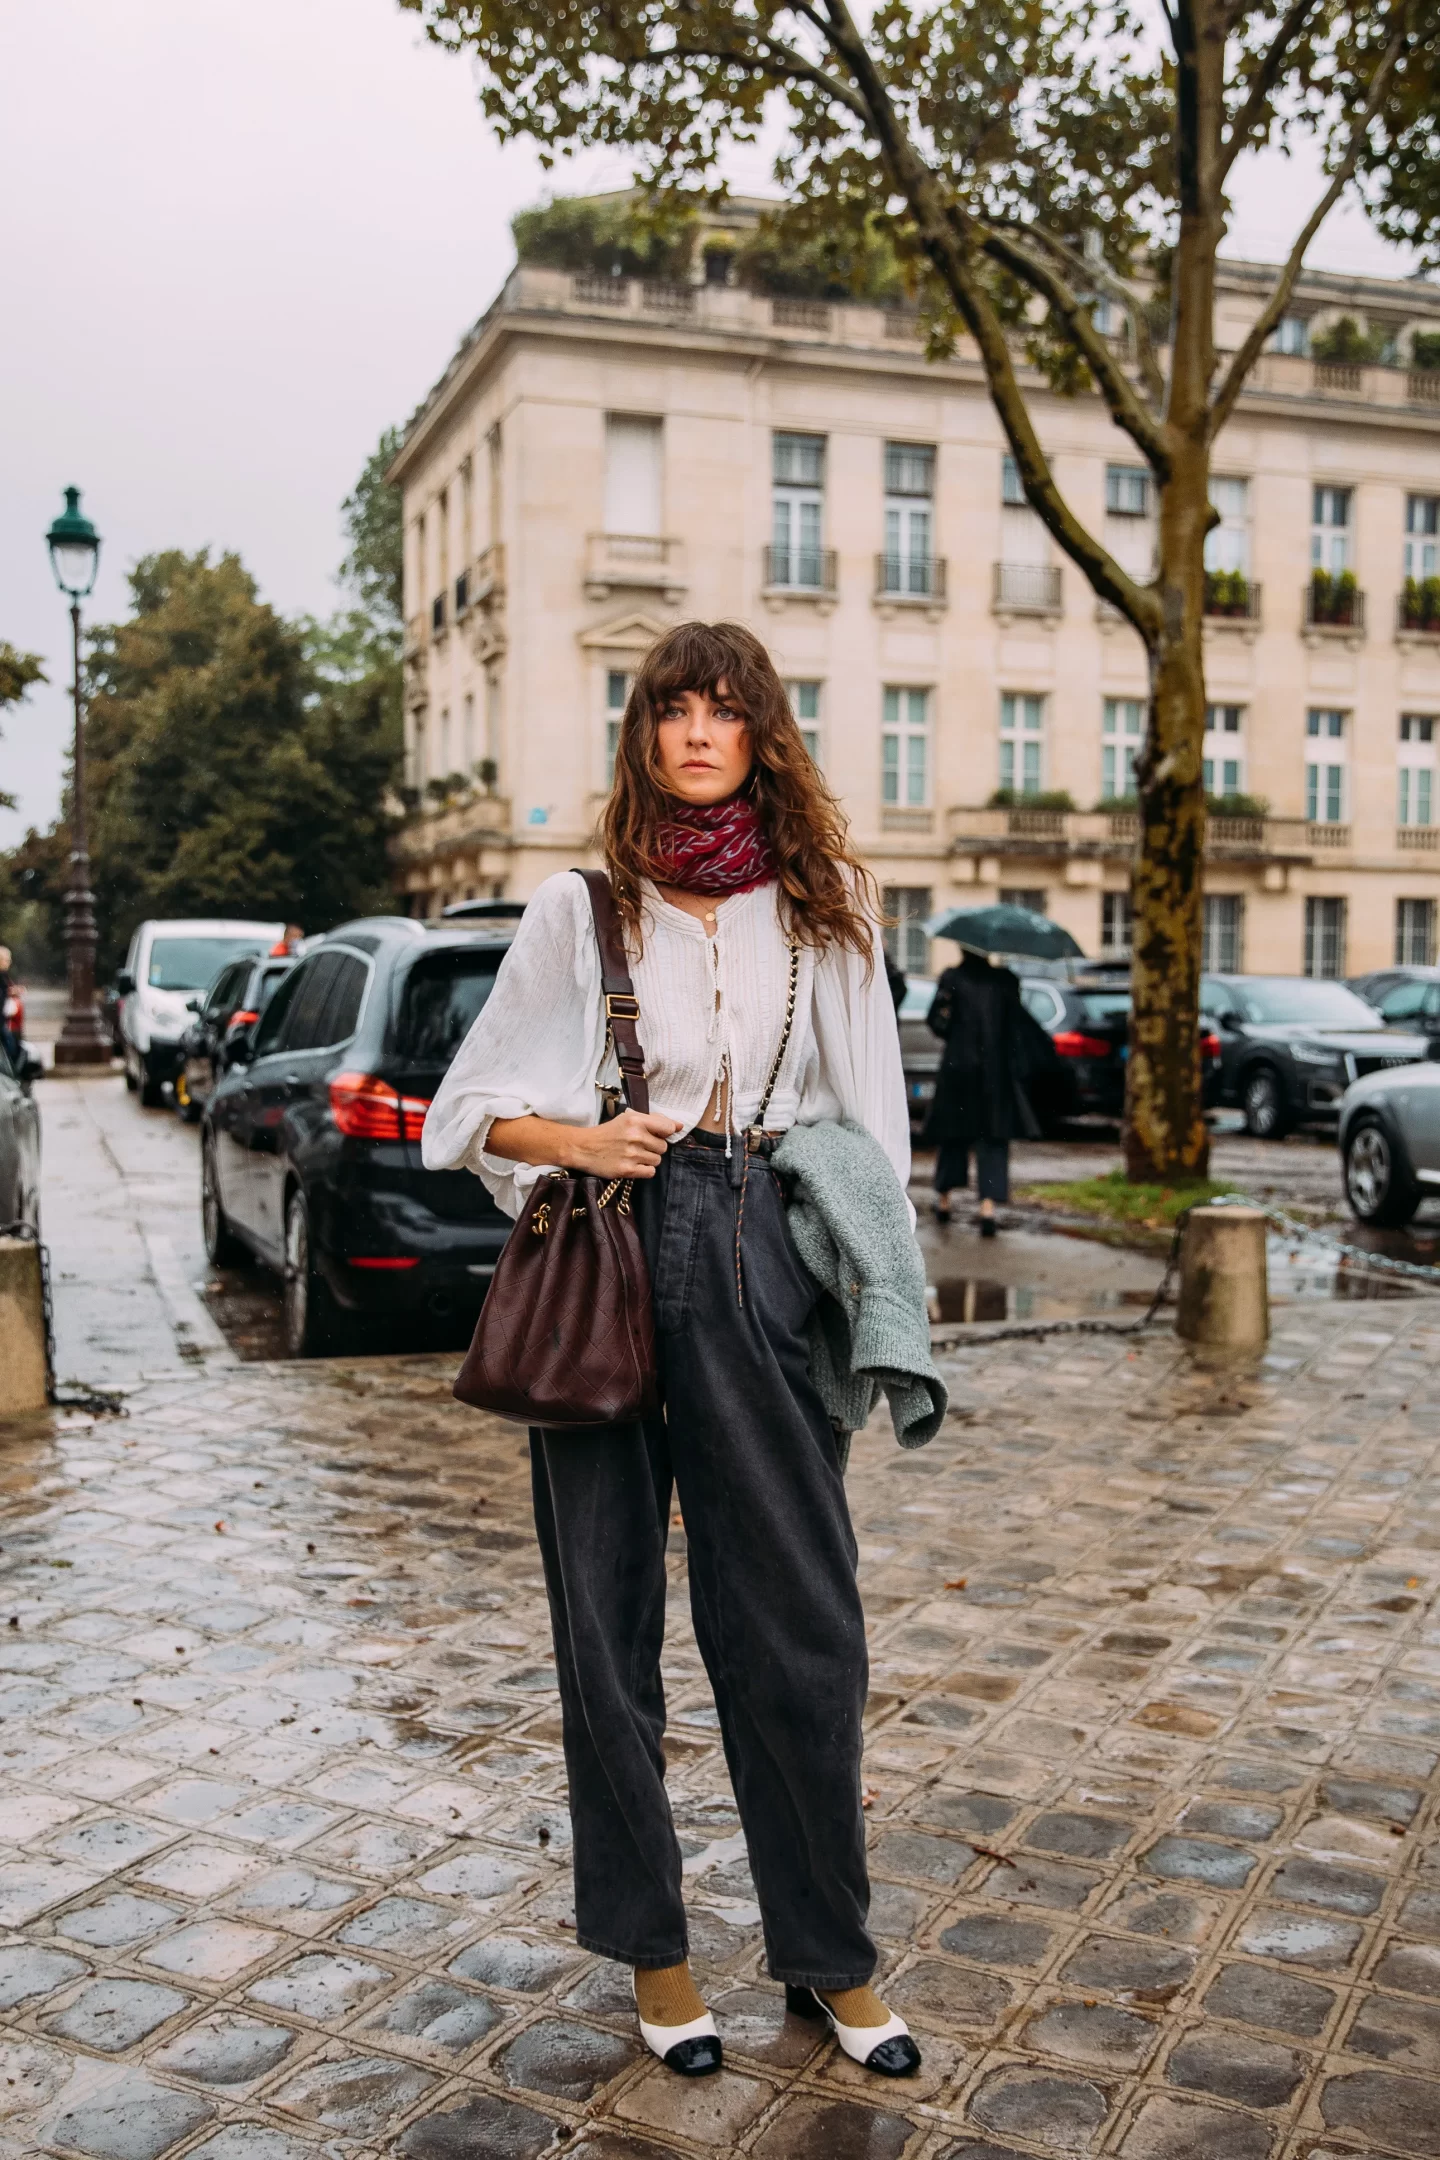 Never hesitate to add a scarf, or colored tights paris